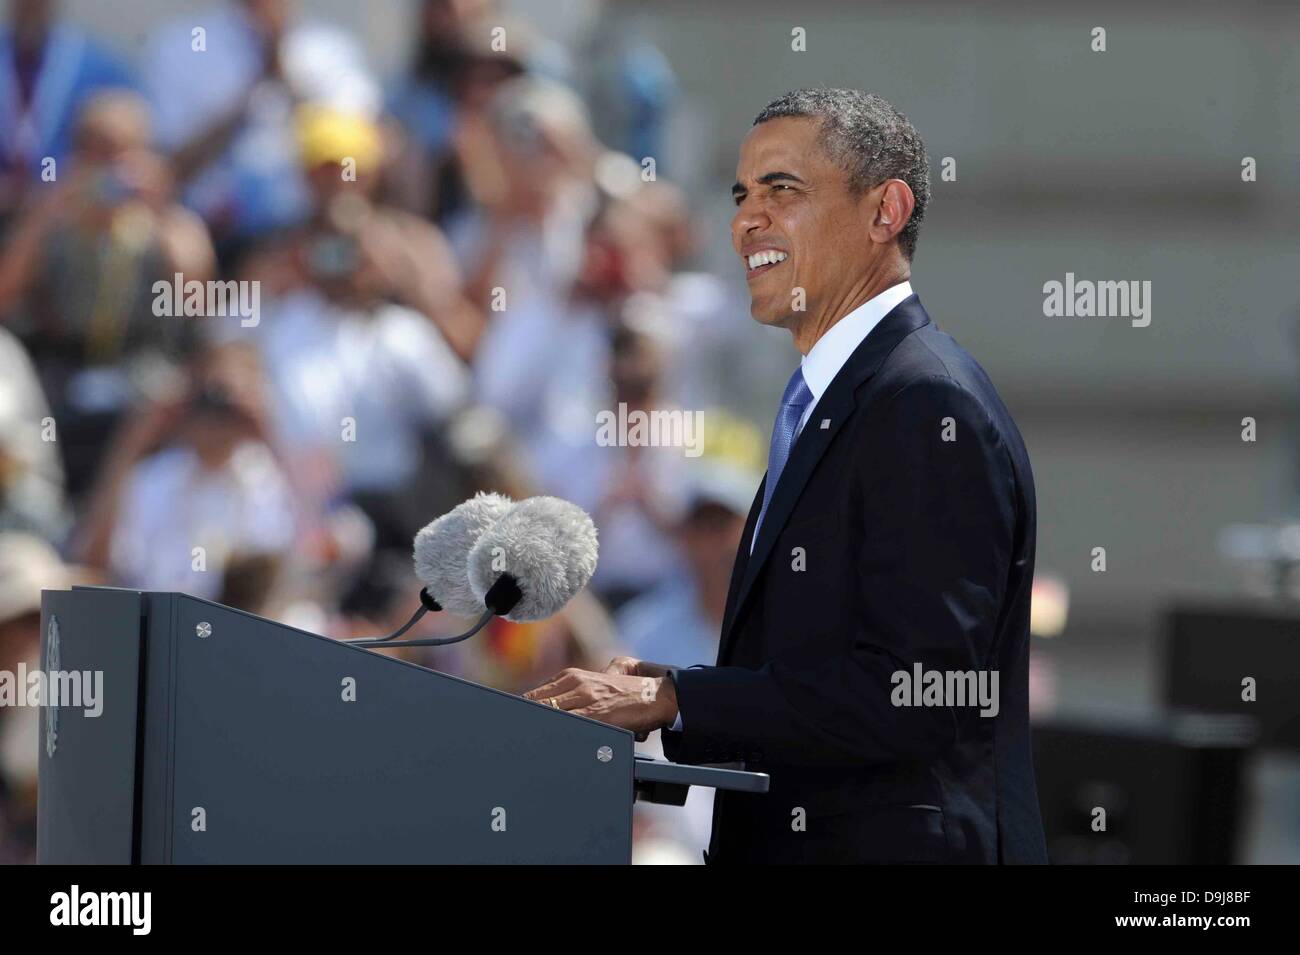 Us President Barack Hussein Obama Speech of U.S. President American / United States Barack Hussein Obama at the Brandenburg Gate in front of the Chosen 4000 18.06.2013 Berlin/picture alliance/dpa/Alamy Live News Stock Photo